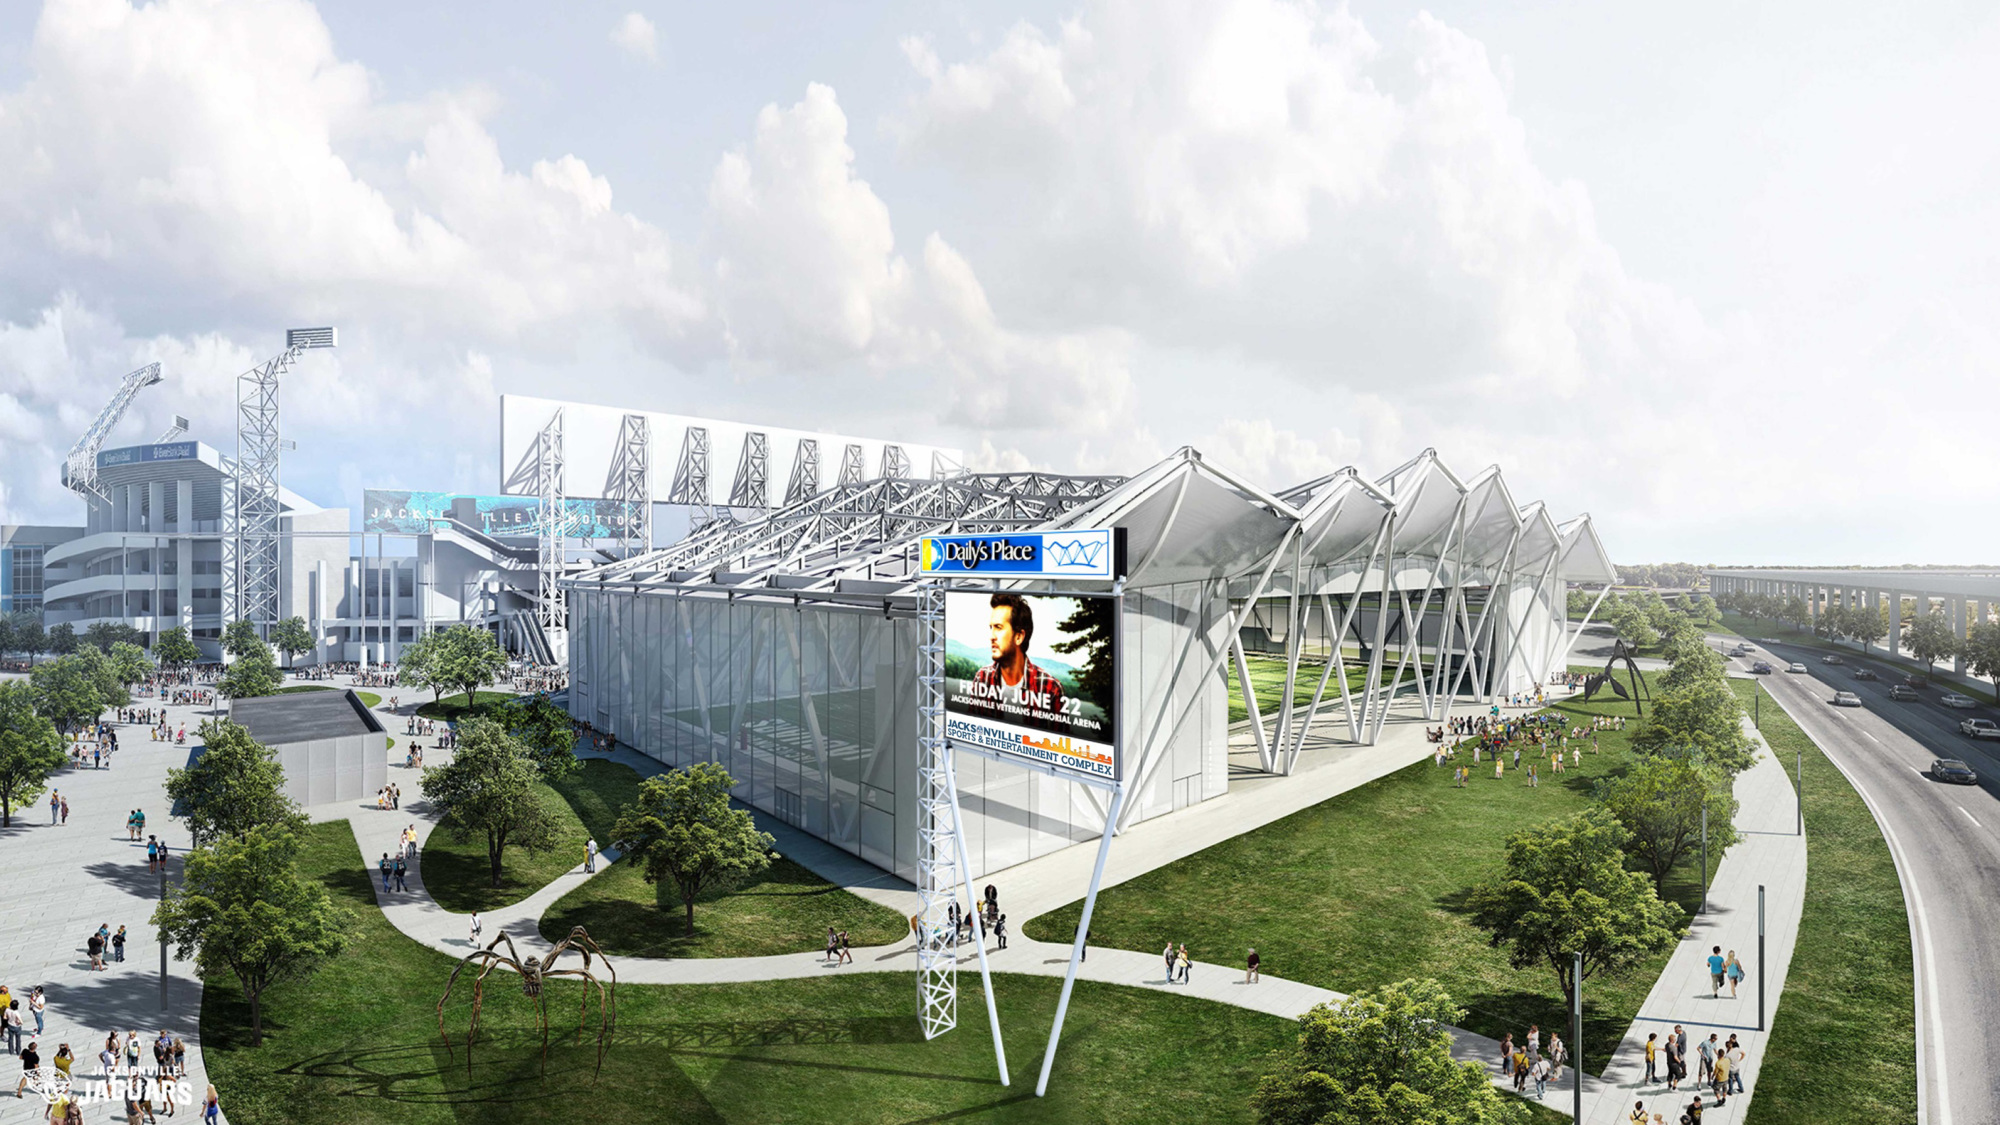 A 60-foot-6-inch tall digital marquee is proposed next to Daily’s Place amphitheater along Gator Bowl Boulevard.